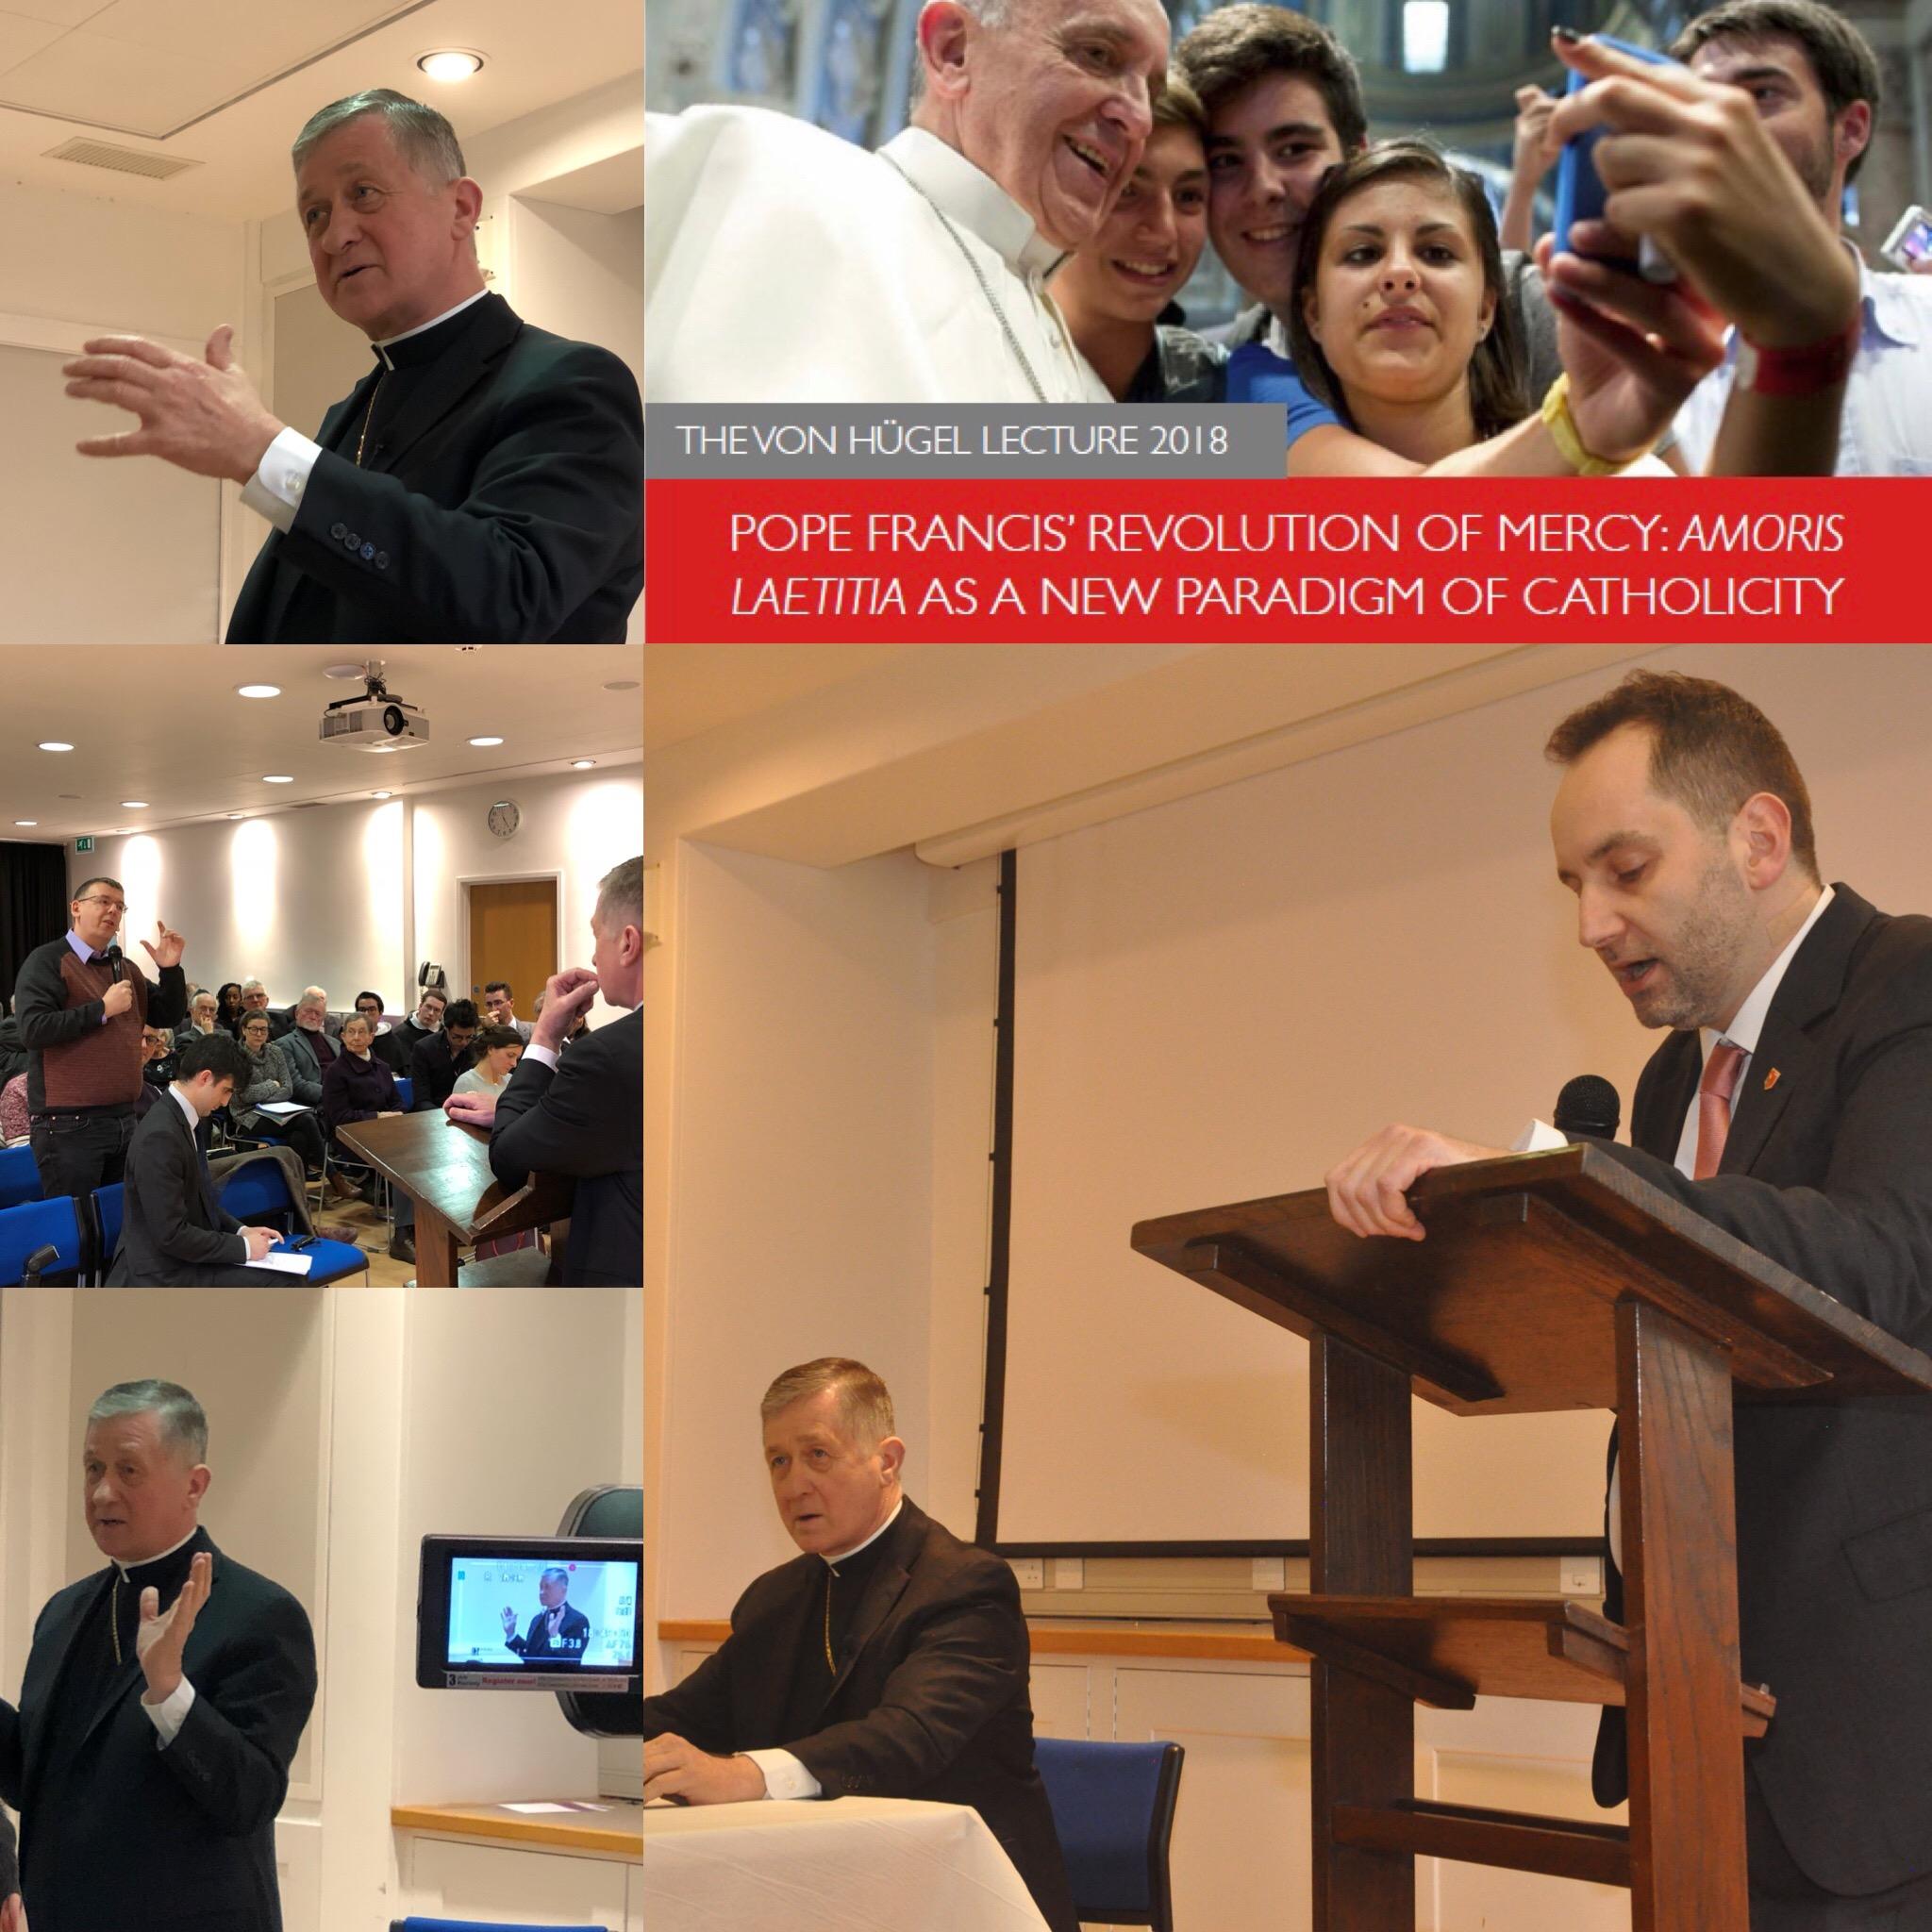 Cardinal Cupich delivers the 2018 Von Hügel Lecture on 'Amoris Laetitia as a New Paradigm of Catholicity’